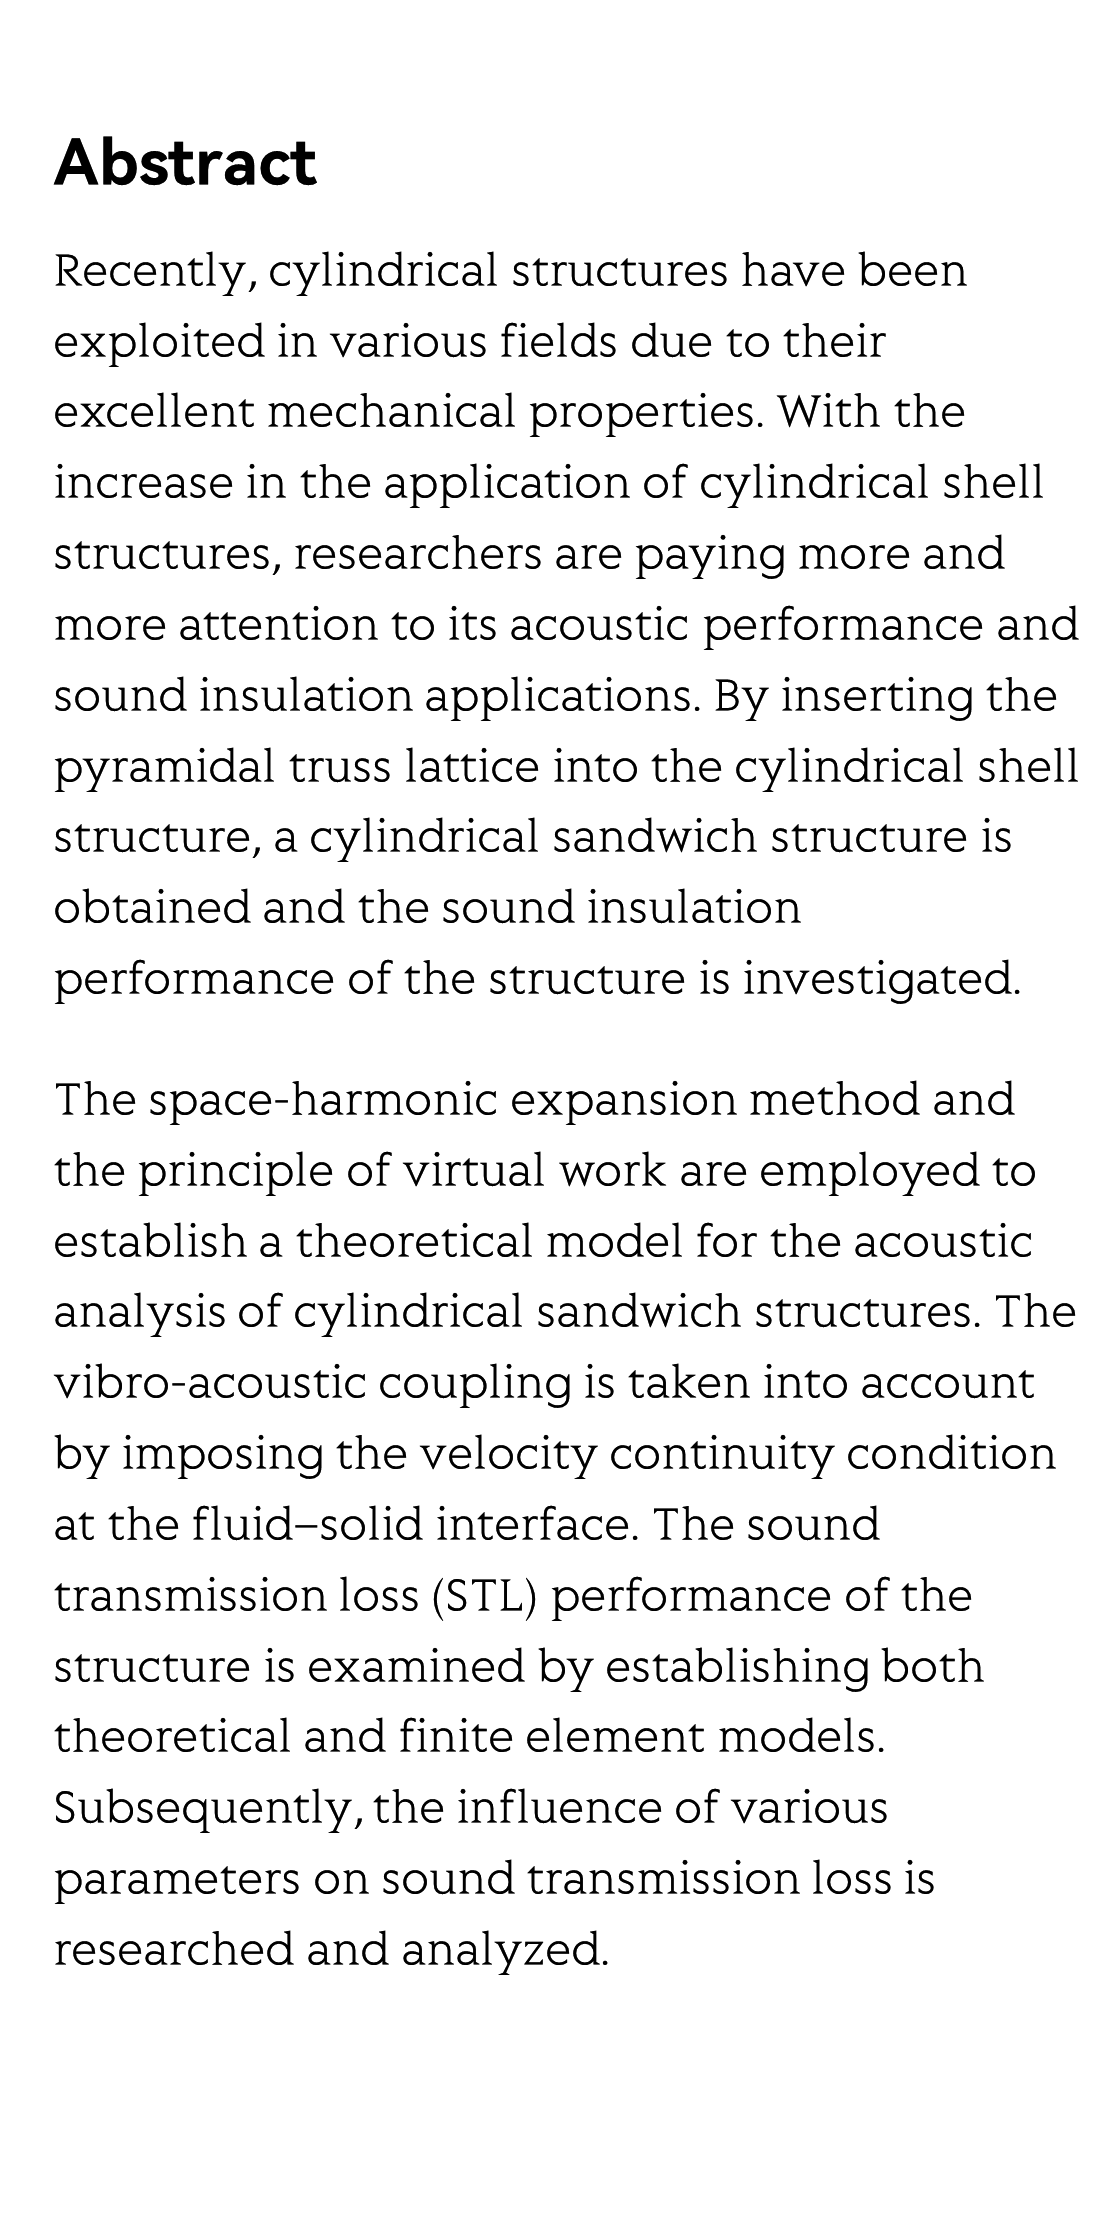 Sound Insulation Performance of Pyramidal Truss Core Cylindrical Sandwich Structure_2